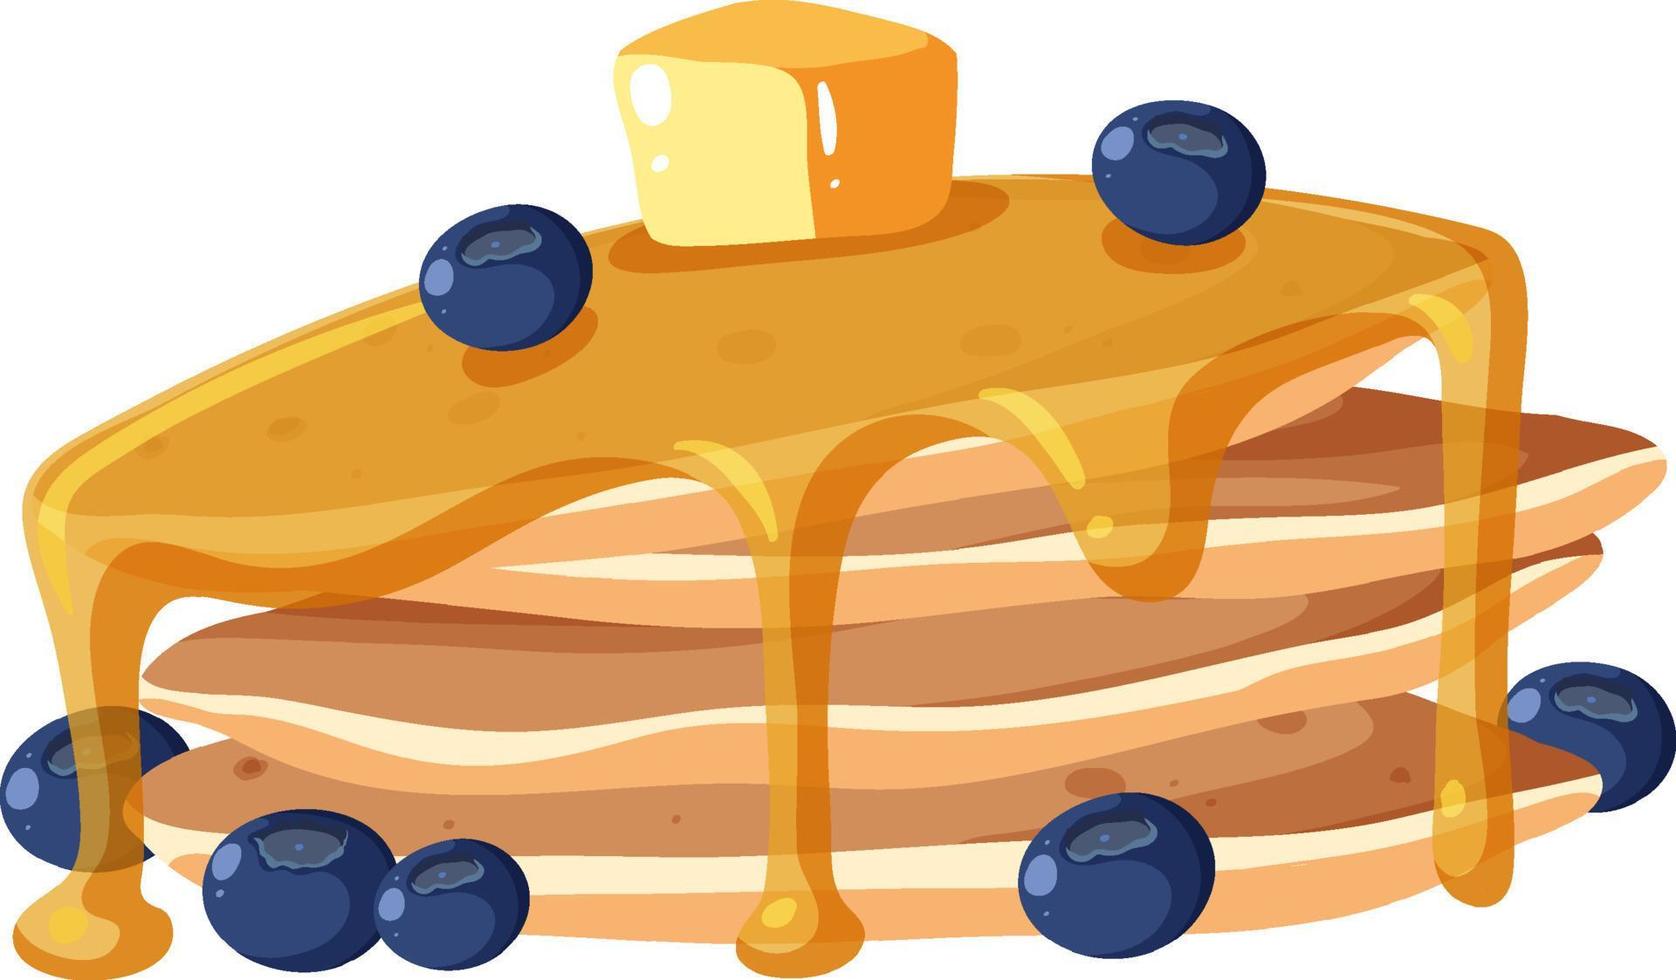 Blueberry pancake with melted butter vector